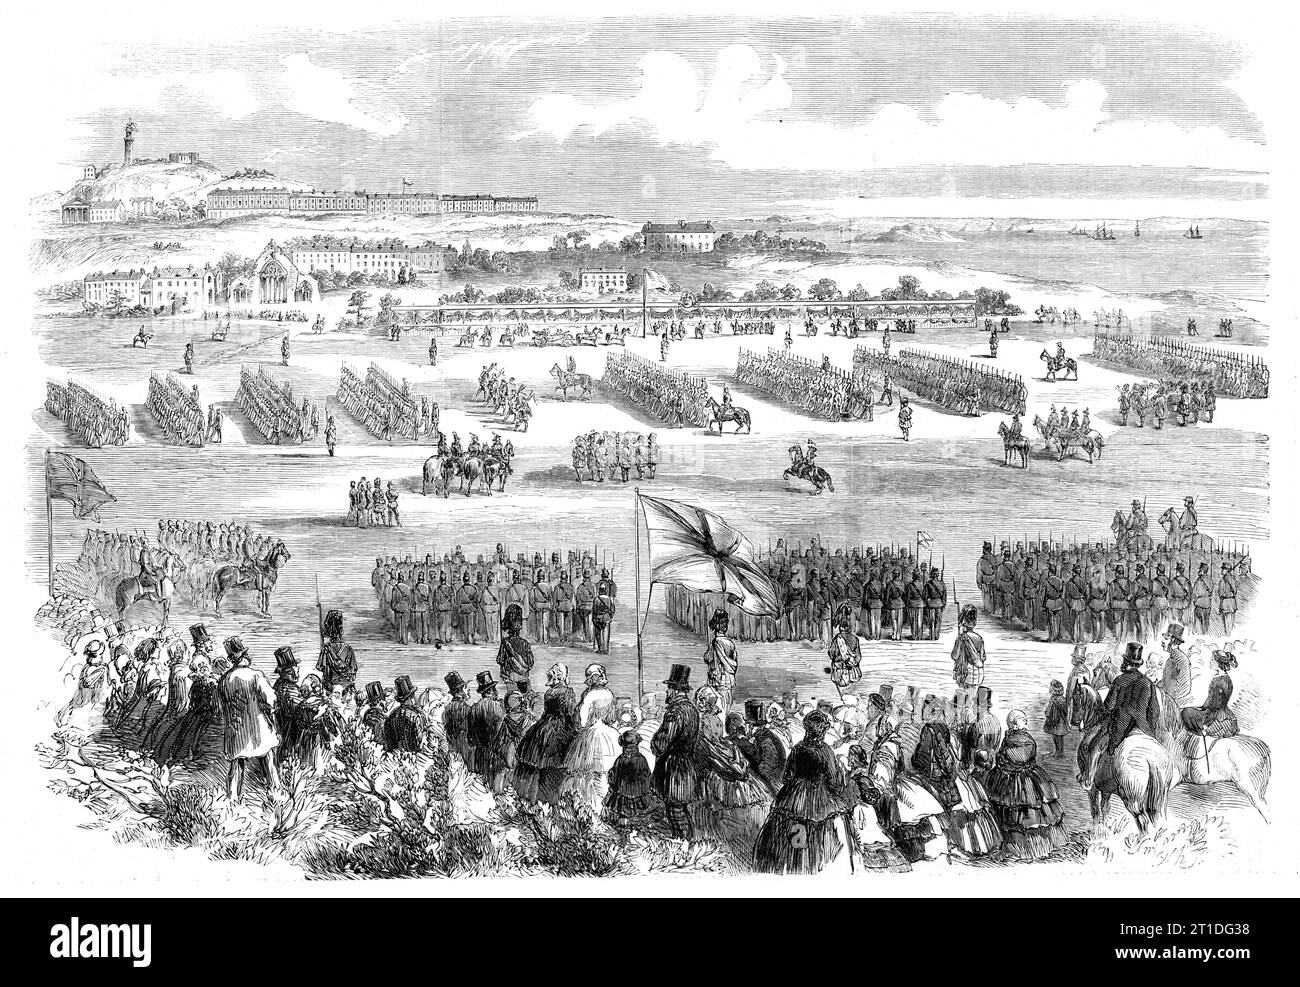 The Review of Rifle Volunteers by the Queen at Edinburgh - the Troops marching past Her Majesty, 1860. From a sketch by B. Clayton. 'The volunteer array was commanded in chief by General Sir George Wetherall, and the two divisions respectively by Lord Rokeby and General Cameron...The marching past of this immense body of volunteers, numbering 21,514, occupied an hour and twenty minutes...The whole army simultaneously moved forward until the bugle called a halt. The officers then saluted with their swords, and the whole line presented arms. The final command given was three cheers for the Queen Stock Photo